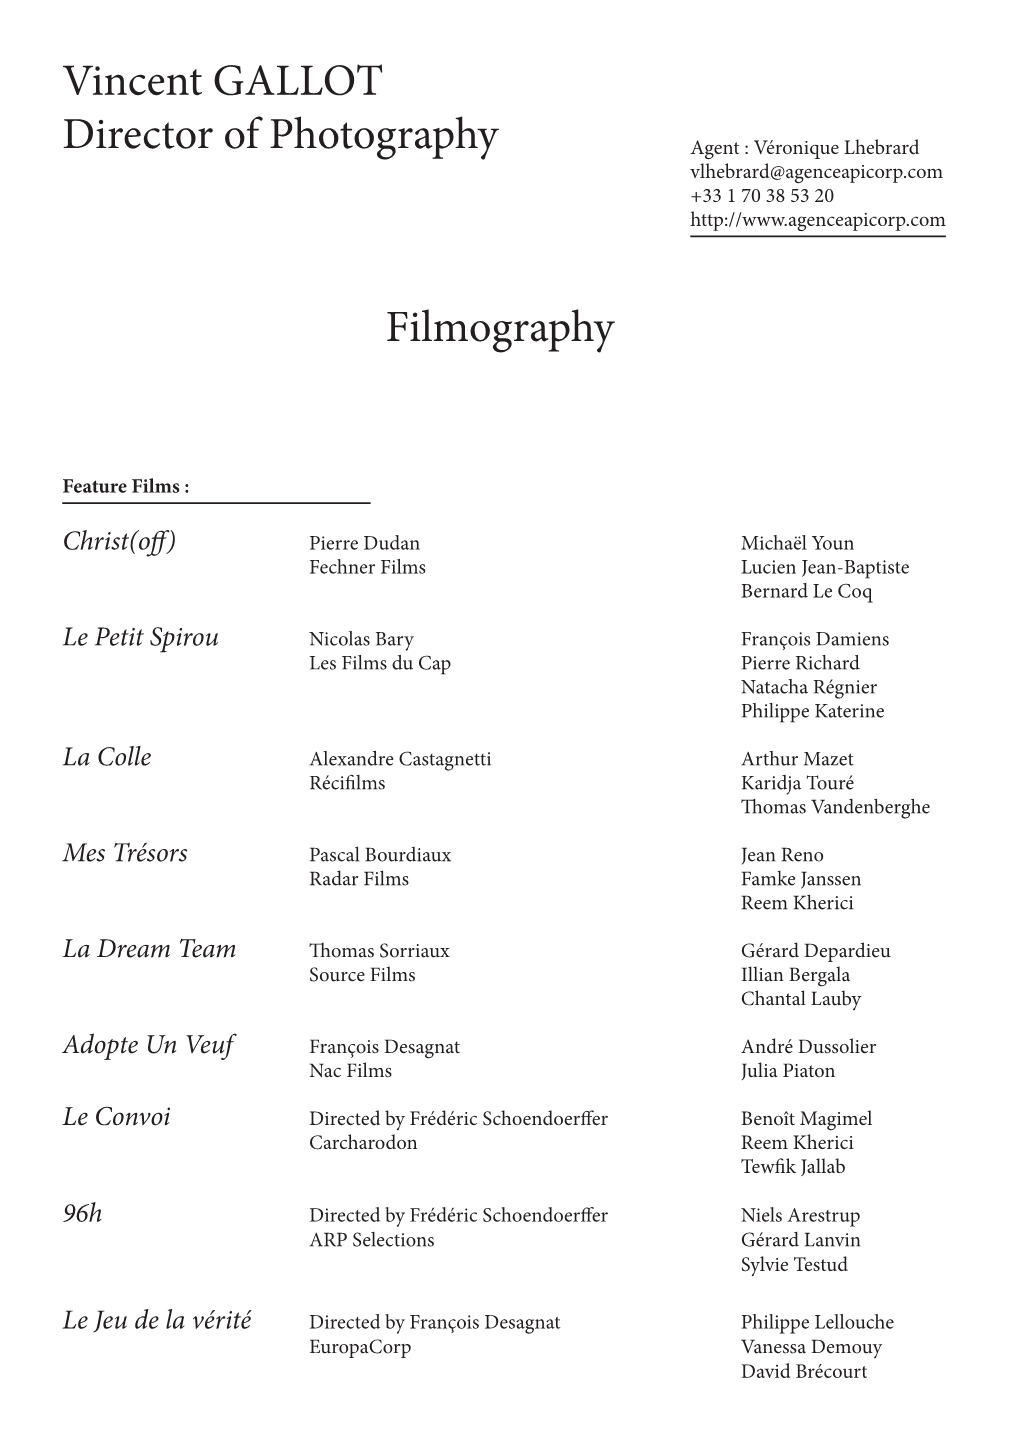 Vincent GALLOT Director of Photography Filmography